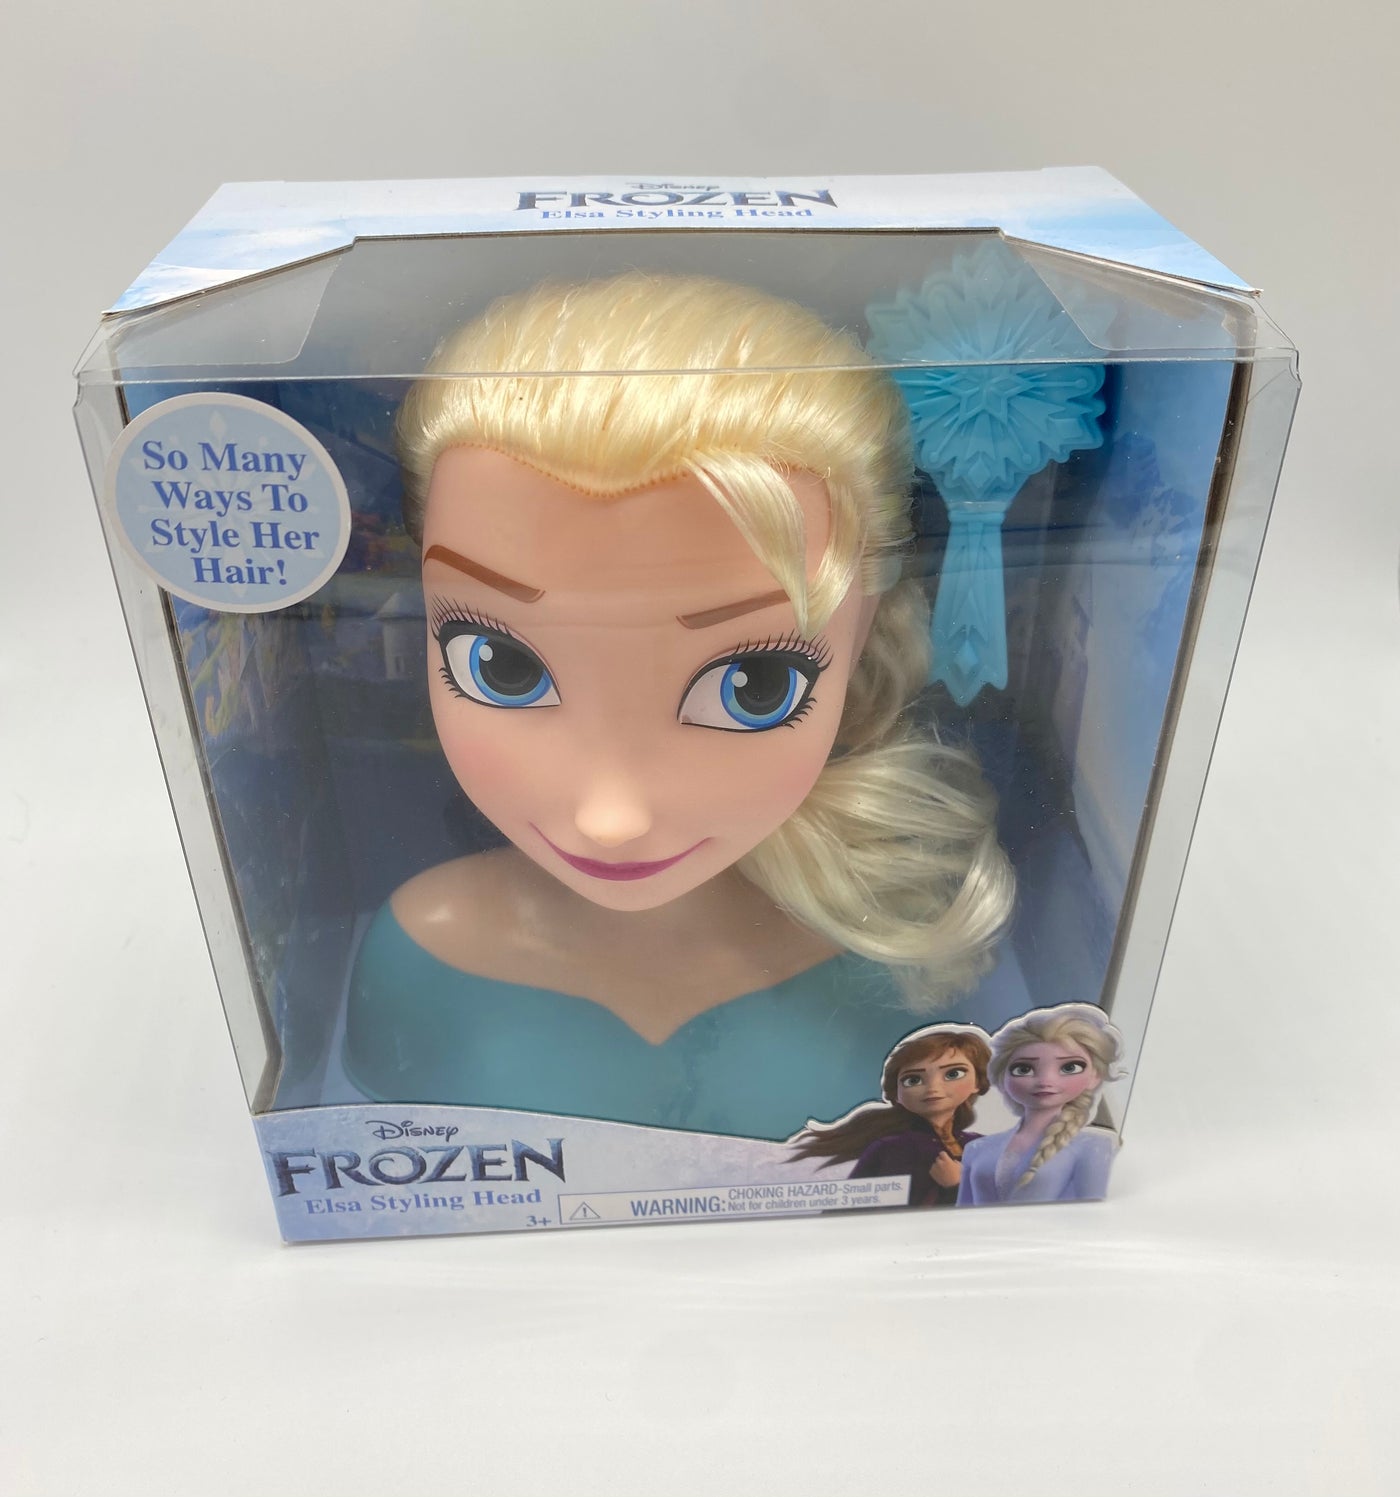 Disney Frozen Princess Elsa Mini Styling Head Toy with Brush New with Box